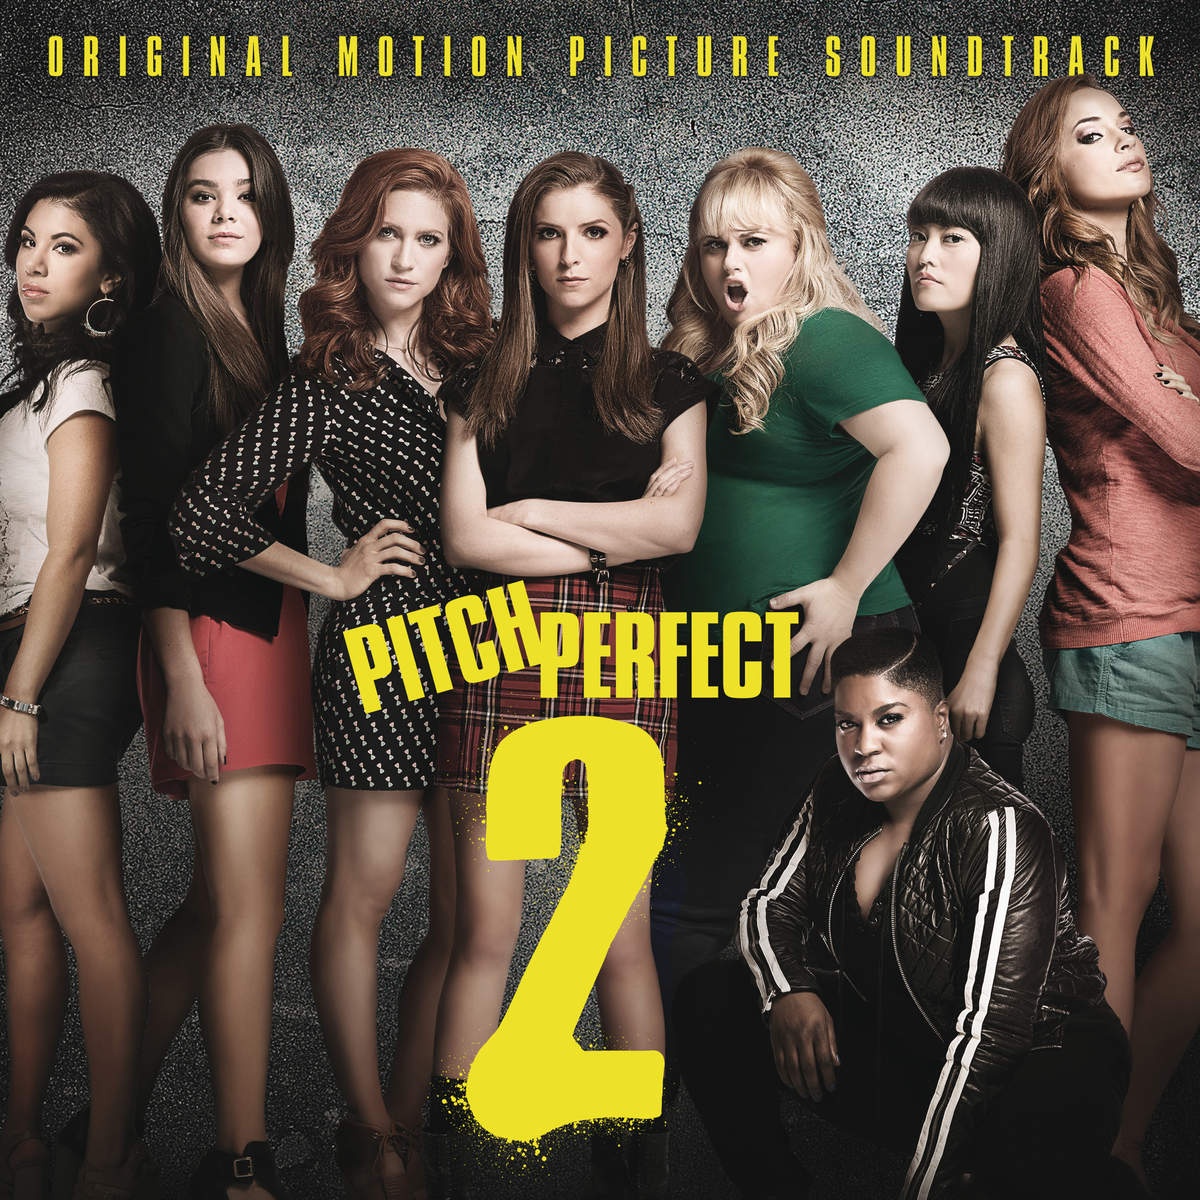 Cups " When I' m Gone"  Campfire Version  From " Pitch Perfect 2" Soundtrack